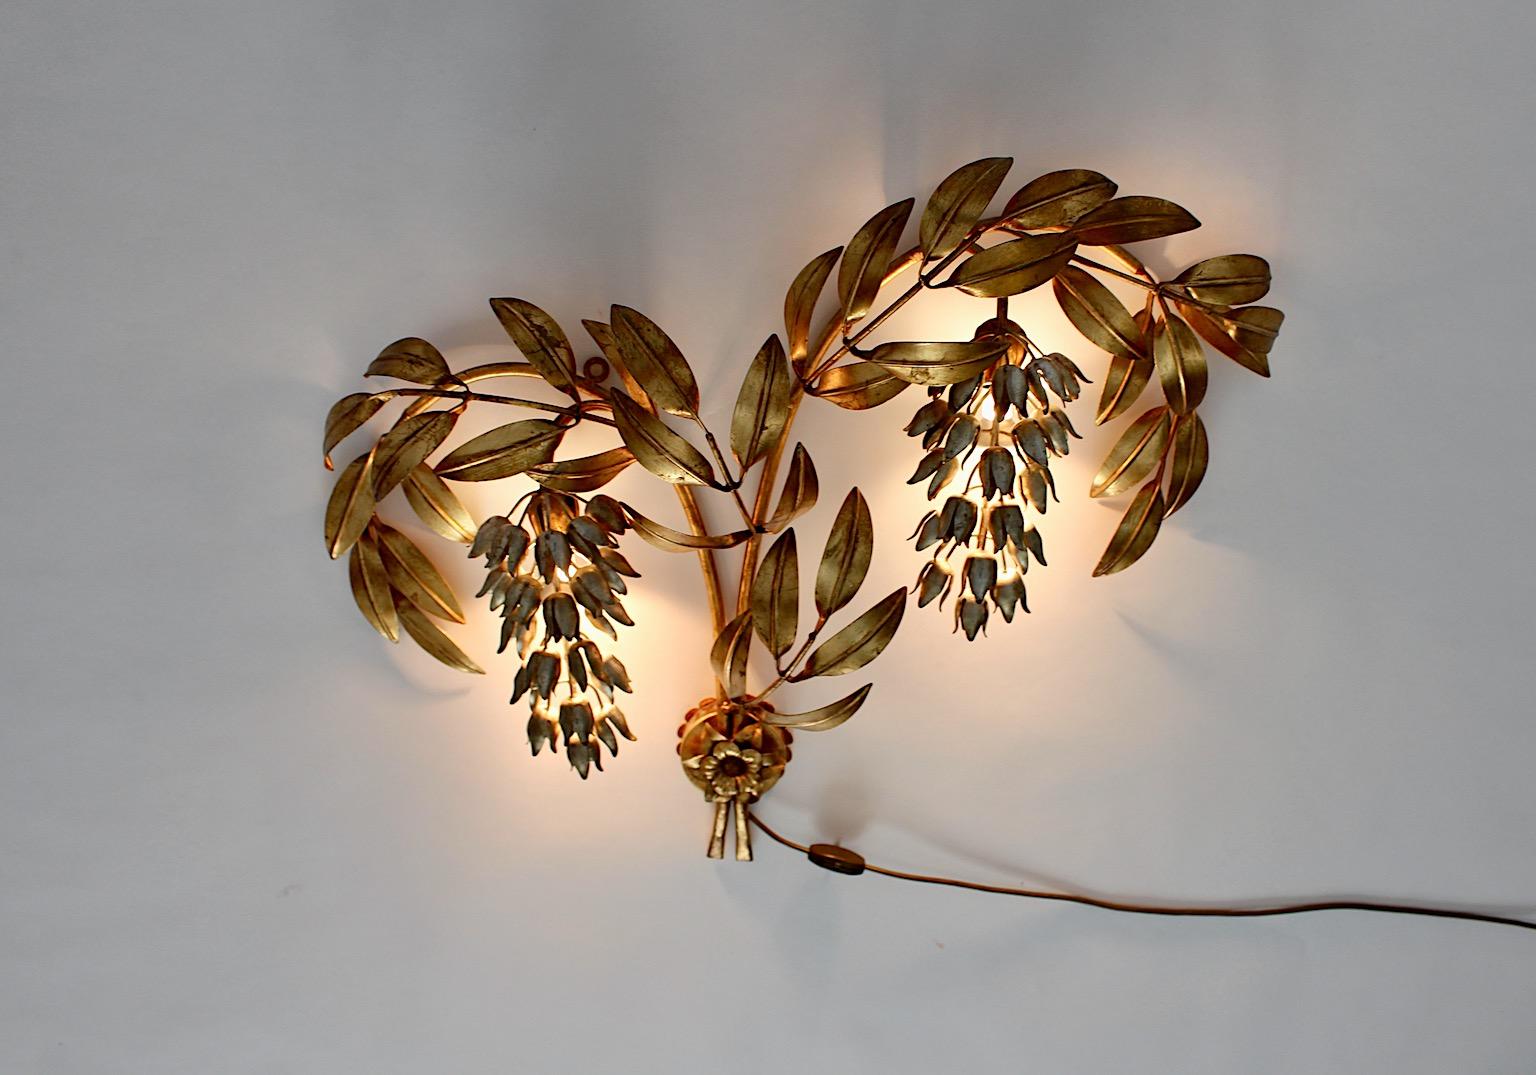 Hollywood Regency style vintage wall light sconce from gilt silver gold metal in flowers and leaves shape designed by Hans Kögl Germany 1970s.
The elegant and very beautiful wall light shows golden leaves and silver flower blossoms in high quality,